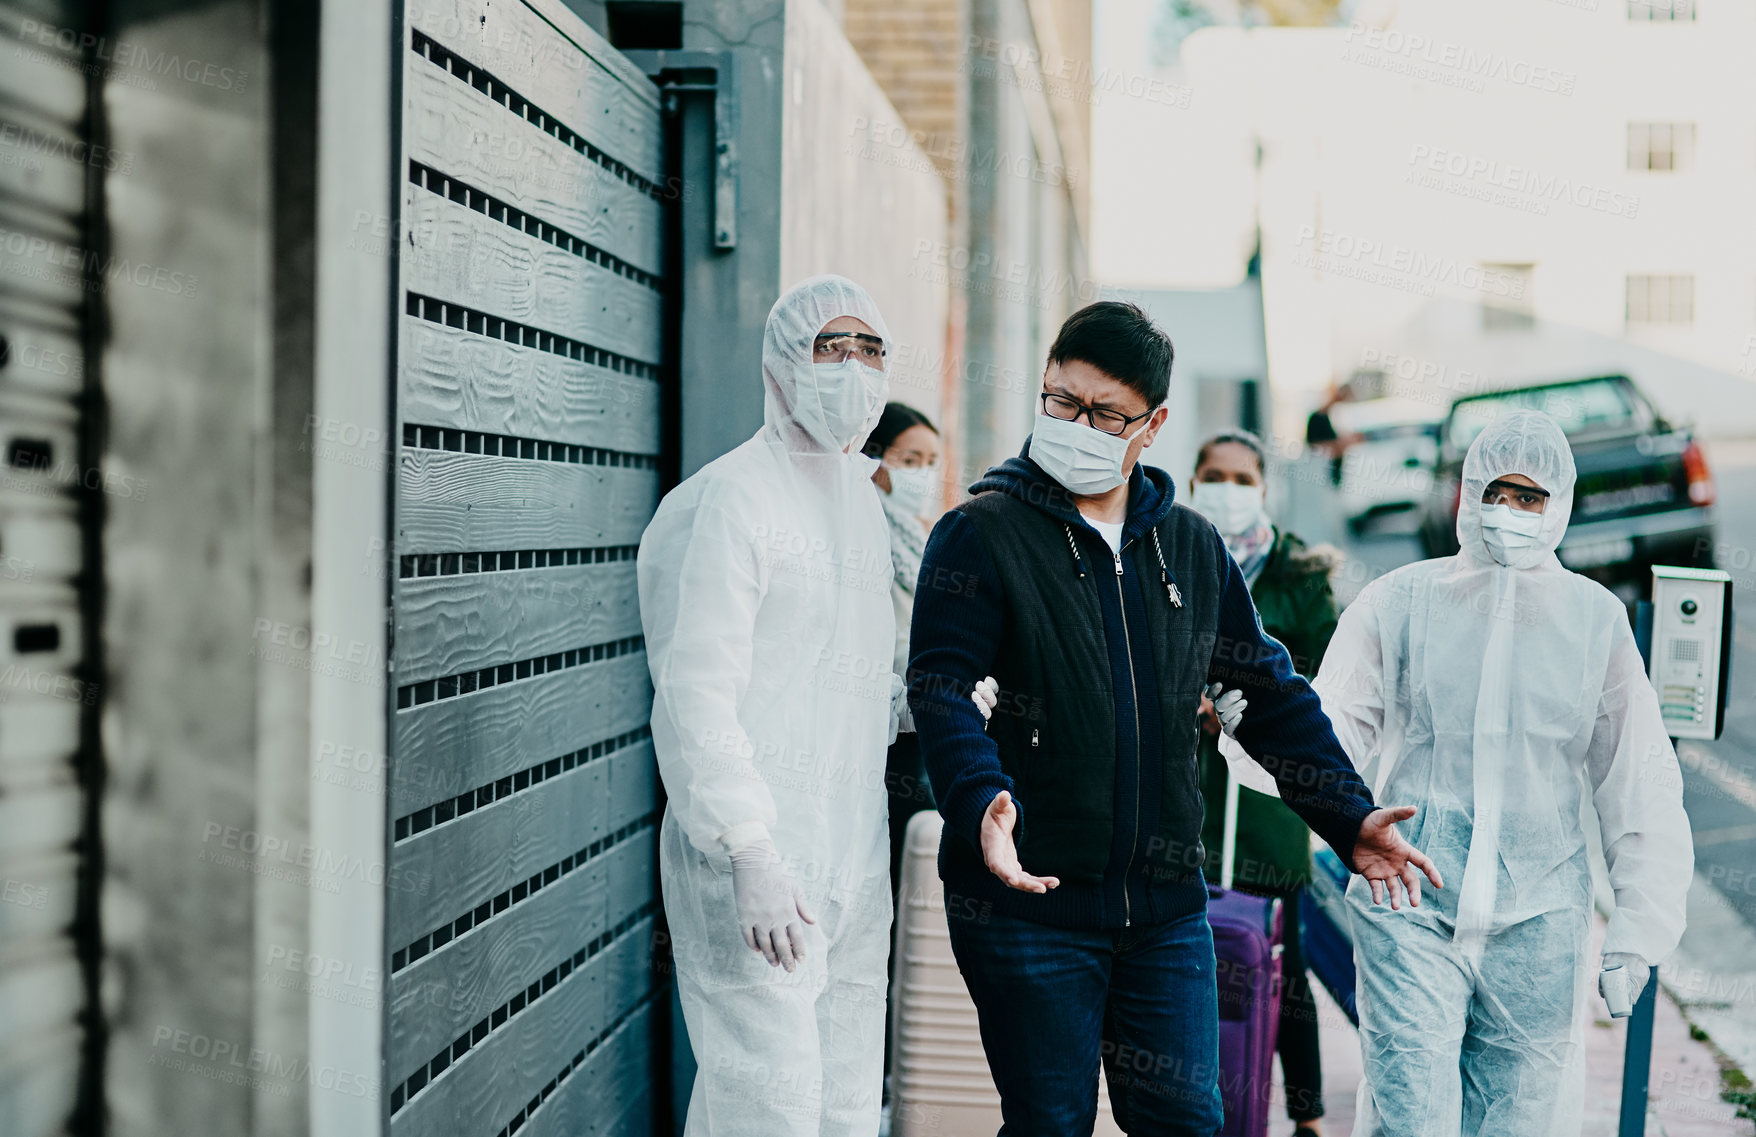 Buy stock photo Man breaking covid regulation getting taken away or arrested by healthcare workers wearing hazmat protective suits. Male removed for not following the rules or restrictions of coronavirus pandemic